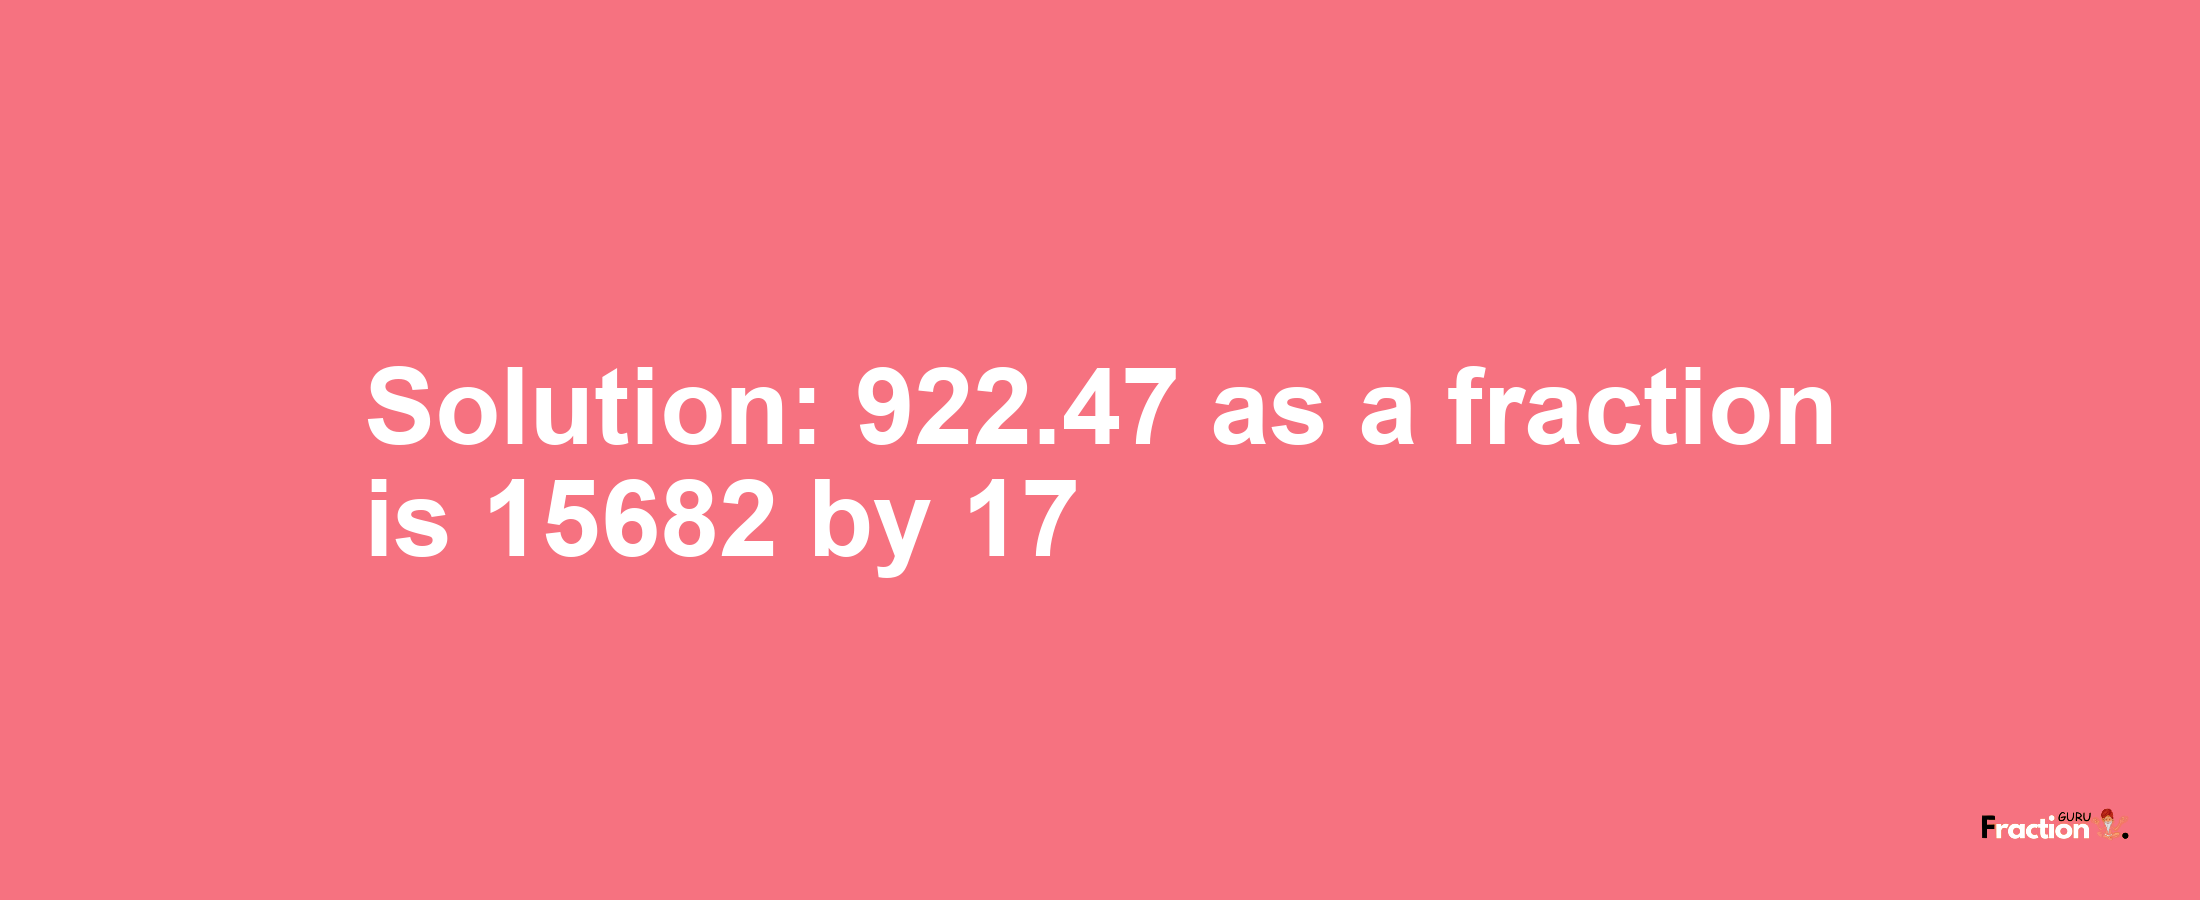 Solution:922.47 as a fraction is 15682/17